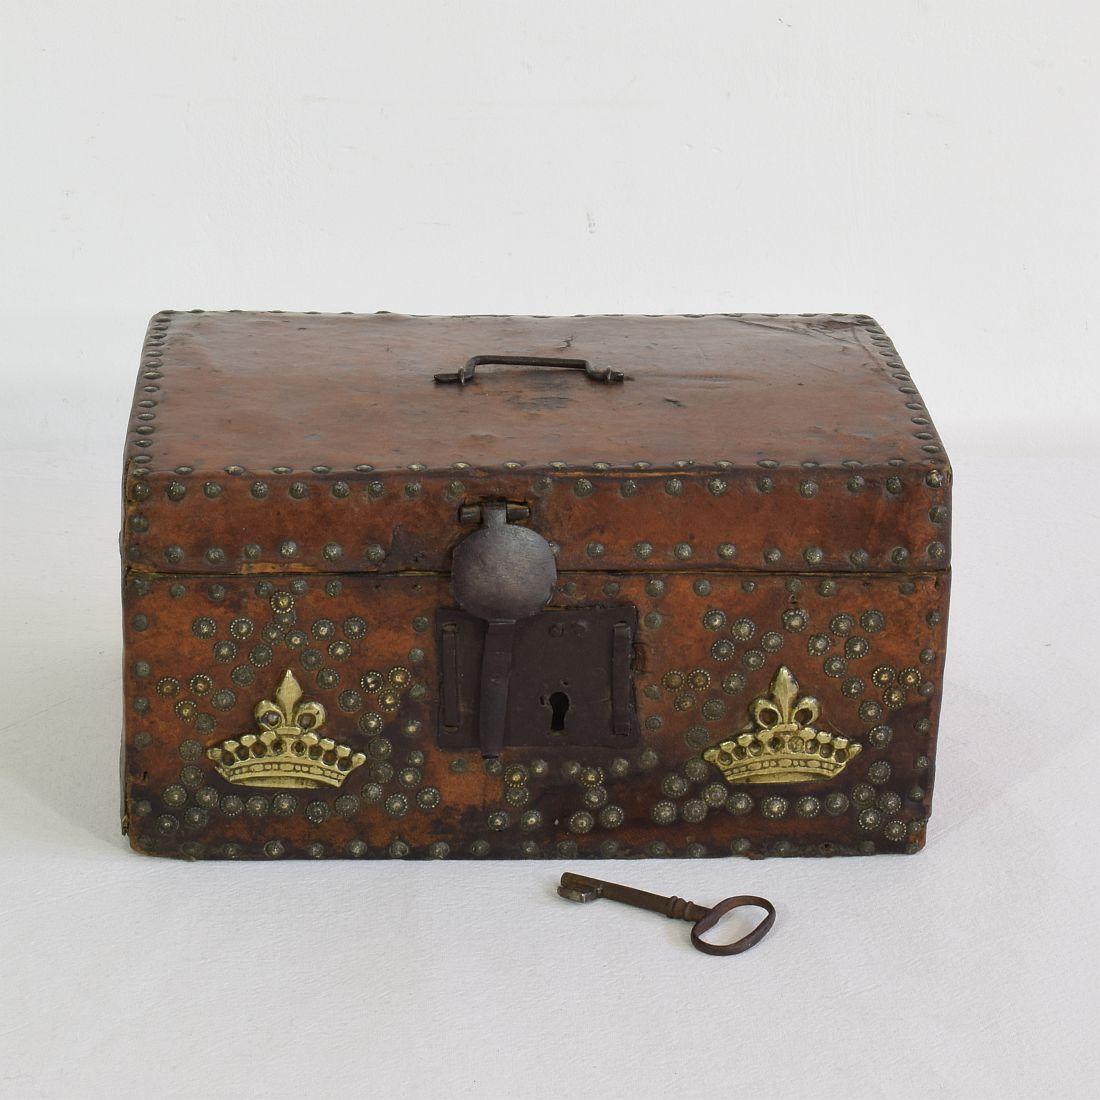 Extremely old box that is covered with leather and decorated with iron and brass. 
Rare find with original and working key and lock,
France, circa 1600-1700
Weathered and some losses.